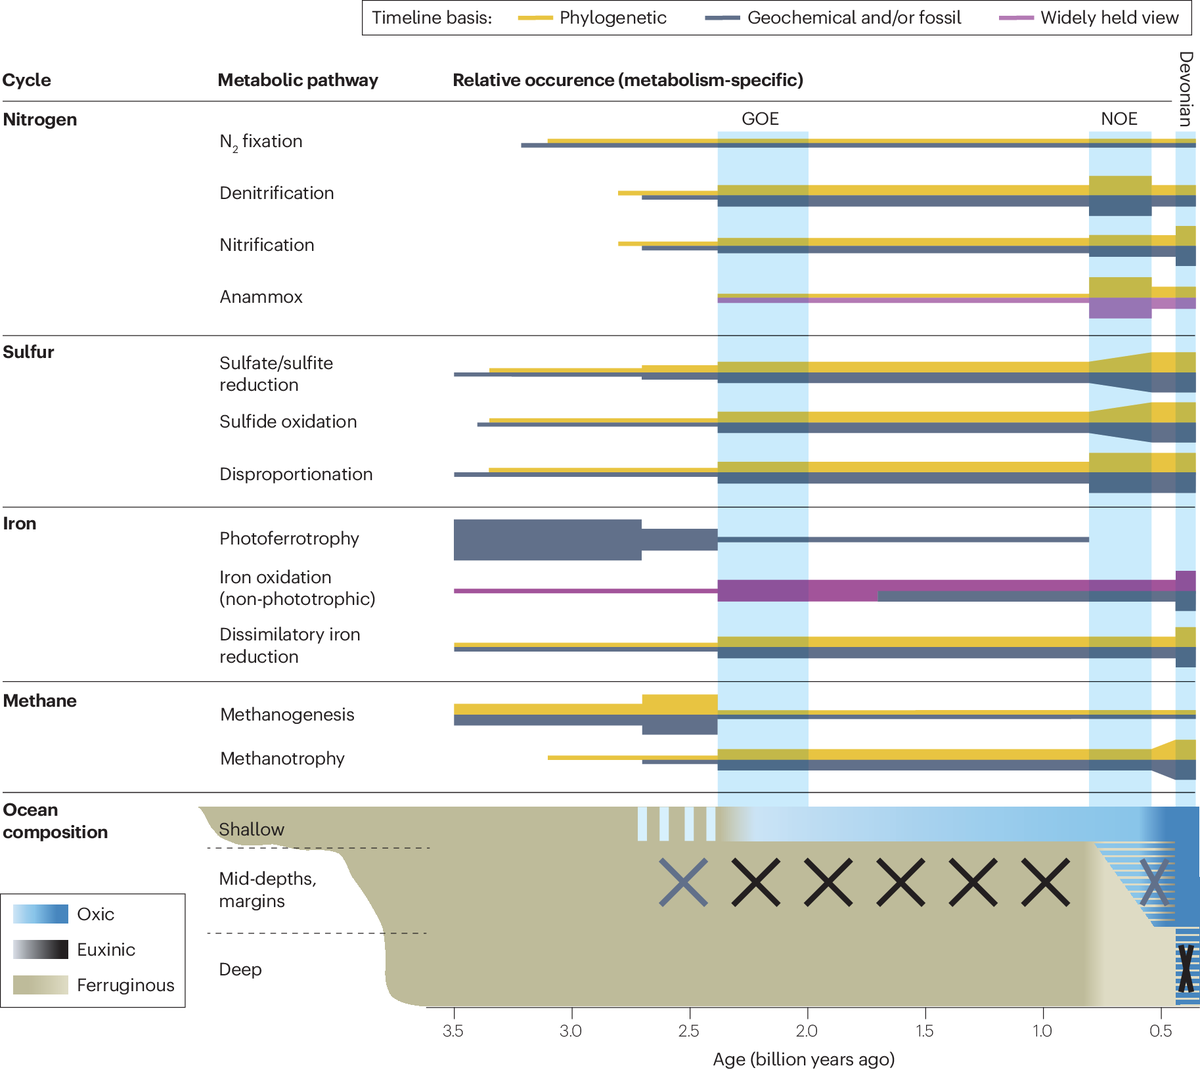 Co‐evolution of early Earth environments and microbial life

rdcu.be/dJyZI

In this Review, Lyons, Tino & colleagues explore the evolution of microbial life, focusing on early metabolic pathways and their role in Earth's changing environments over billions of years.